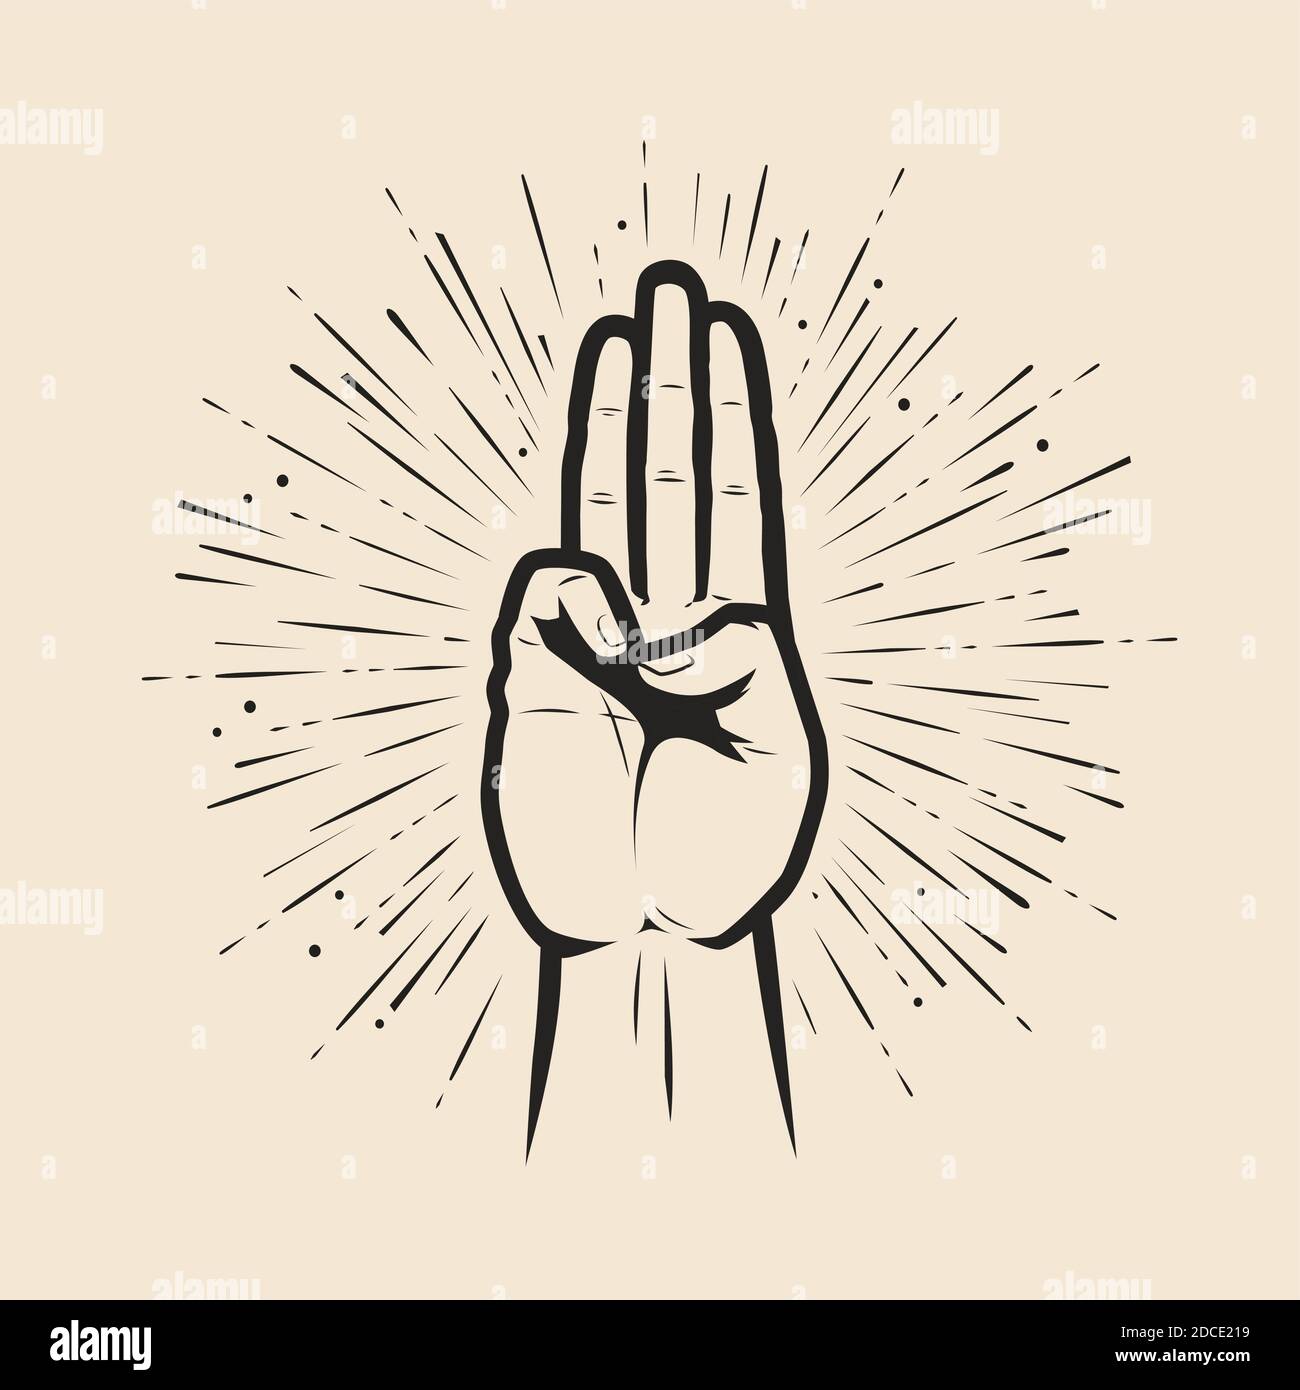 Scout symbol hand gesture. Scouting symbol vector illustration Stock Vector